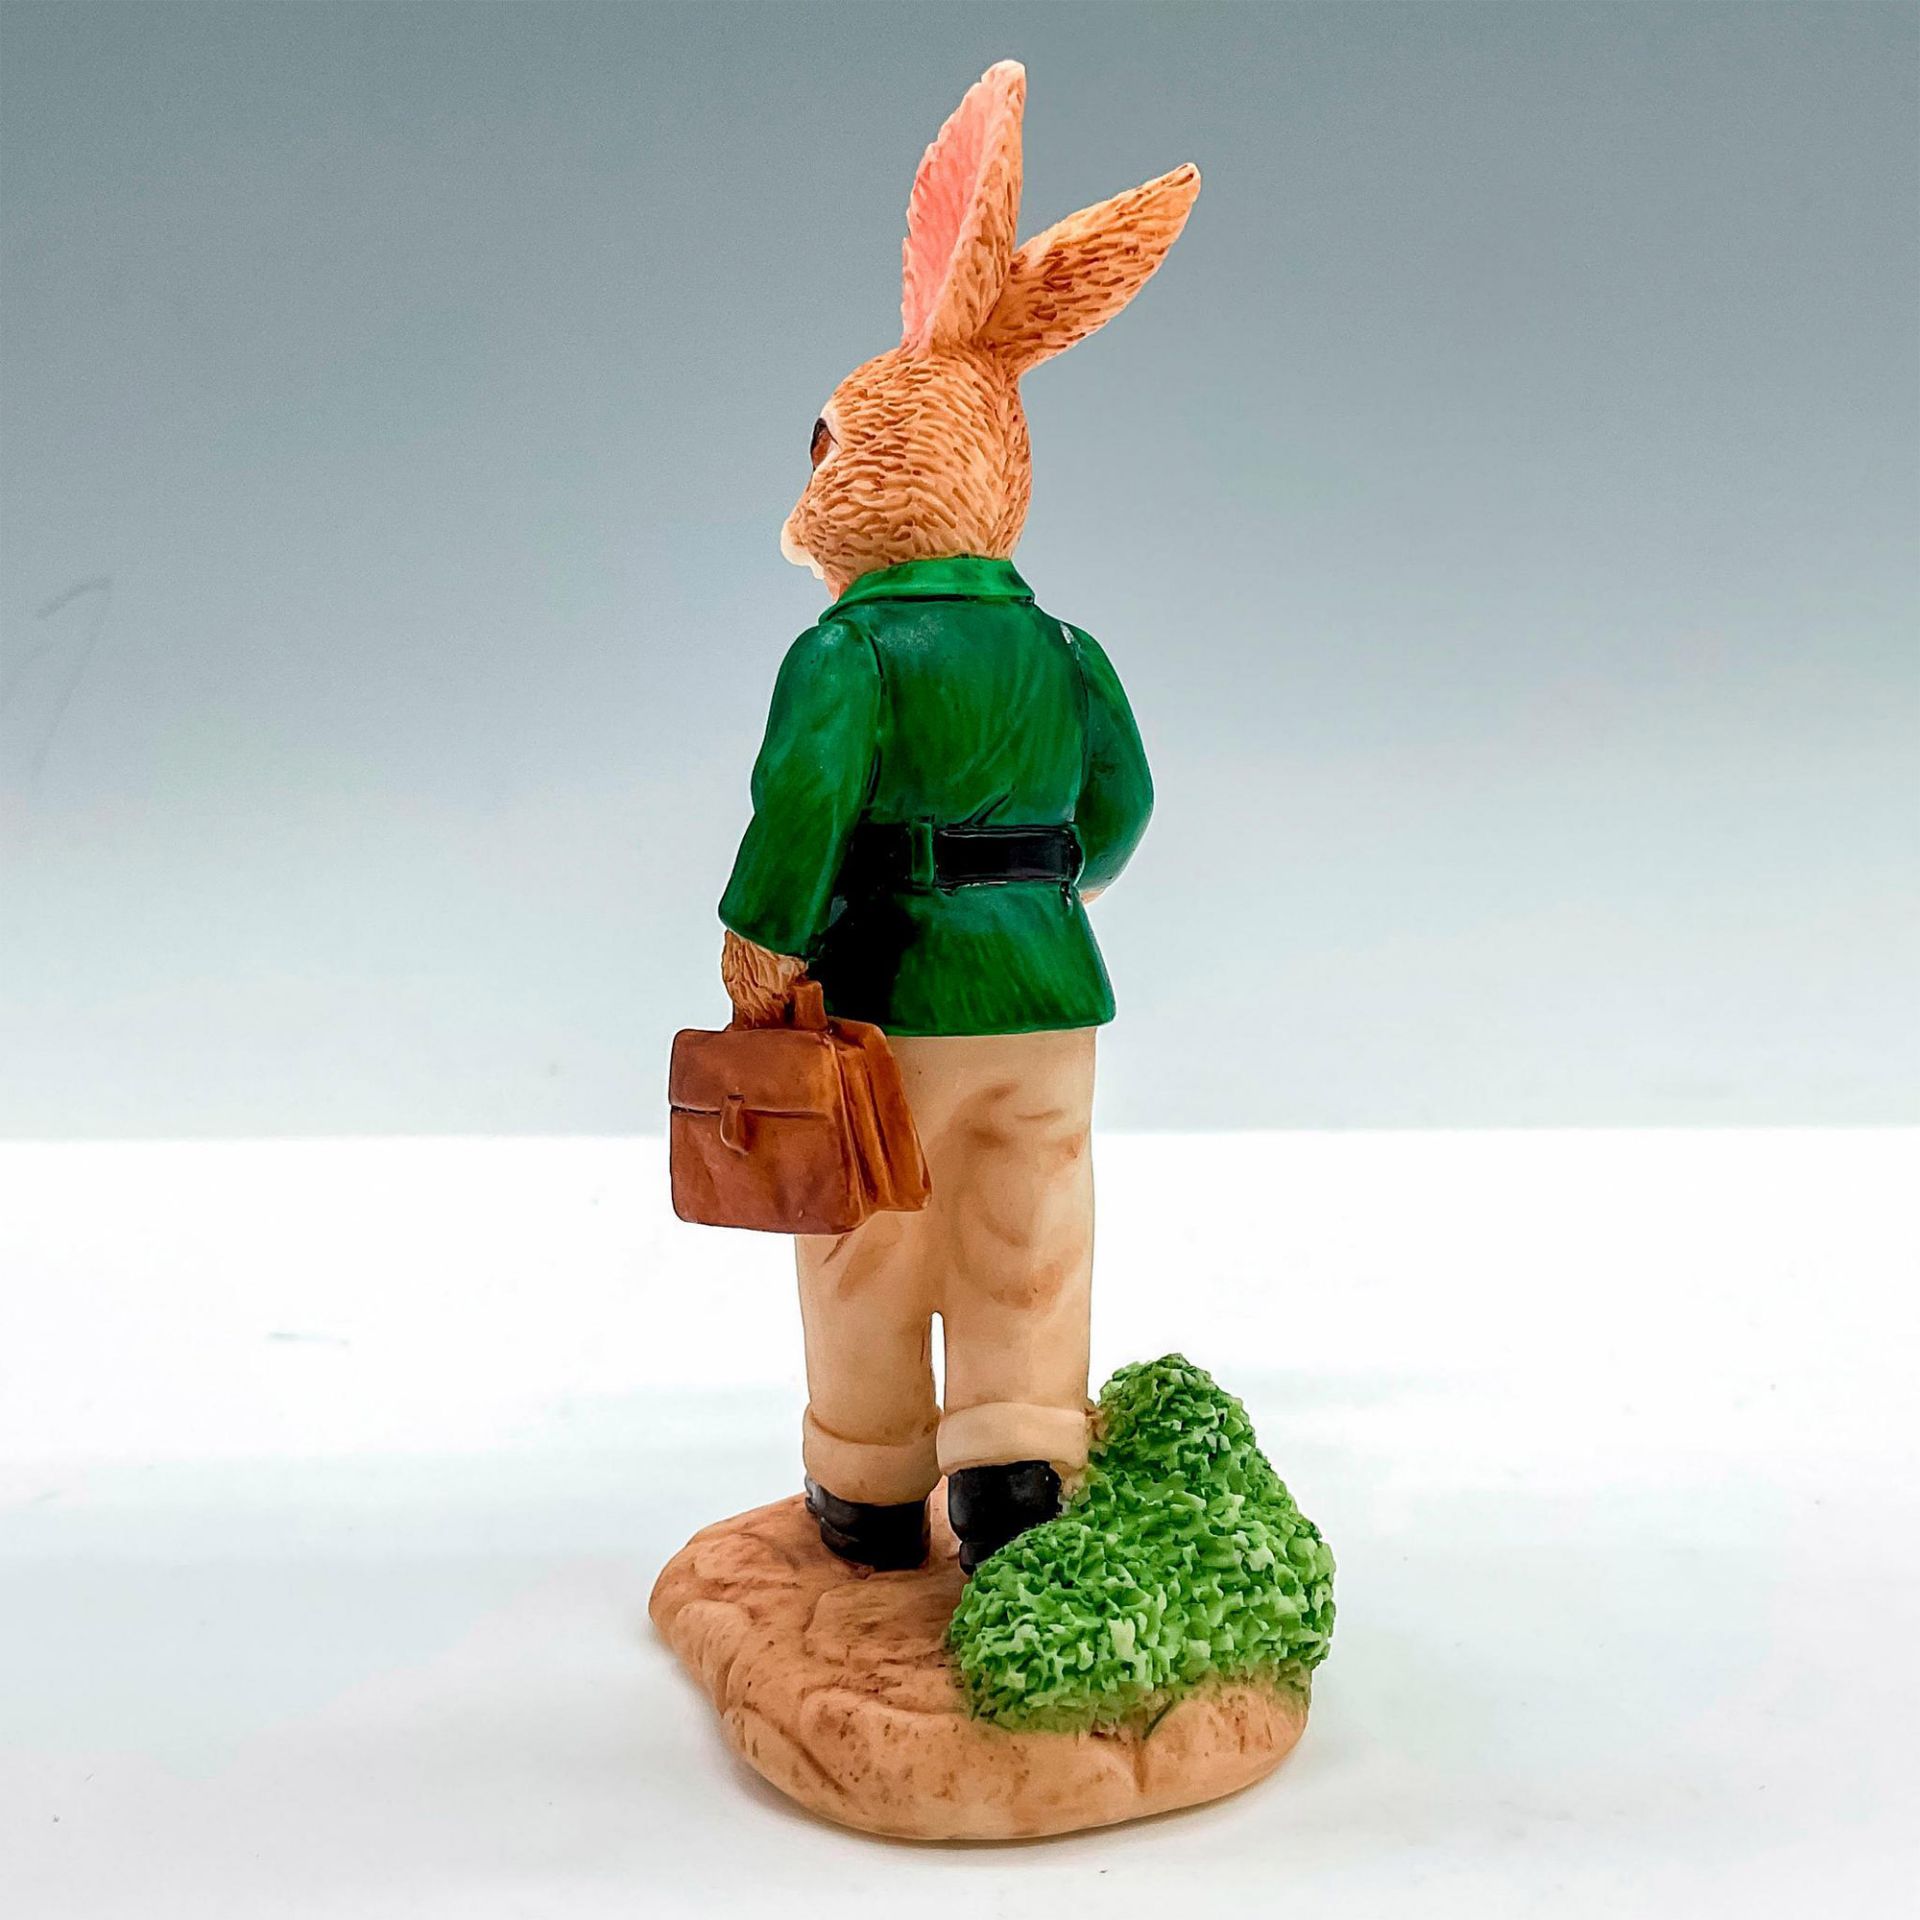 Royal Doulton Bunnykins Figurine, Home From Work DBR8 - Image 2 of 3